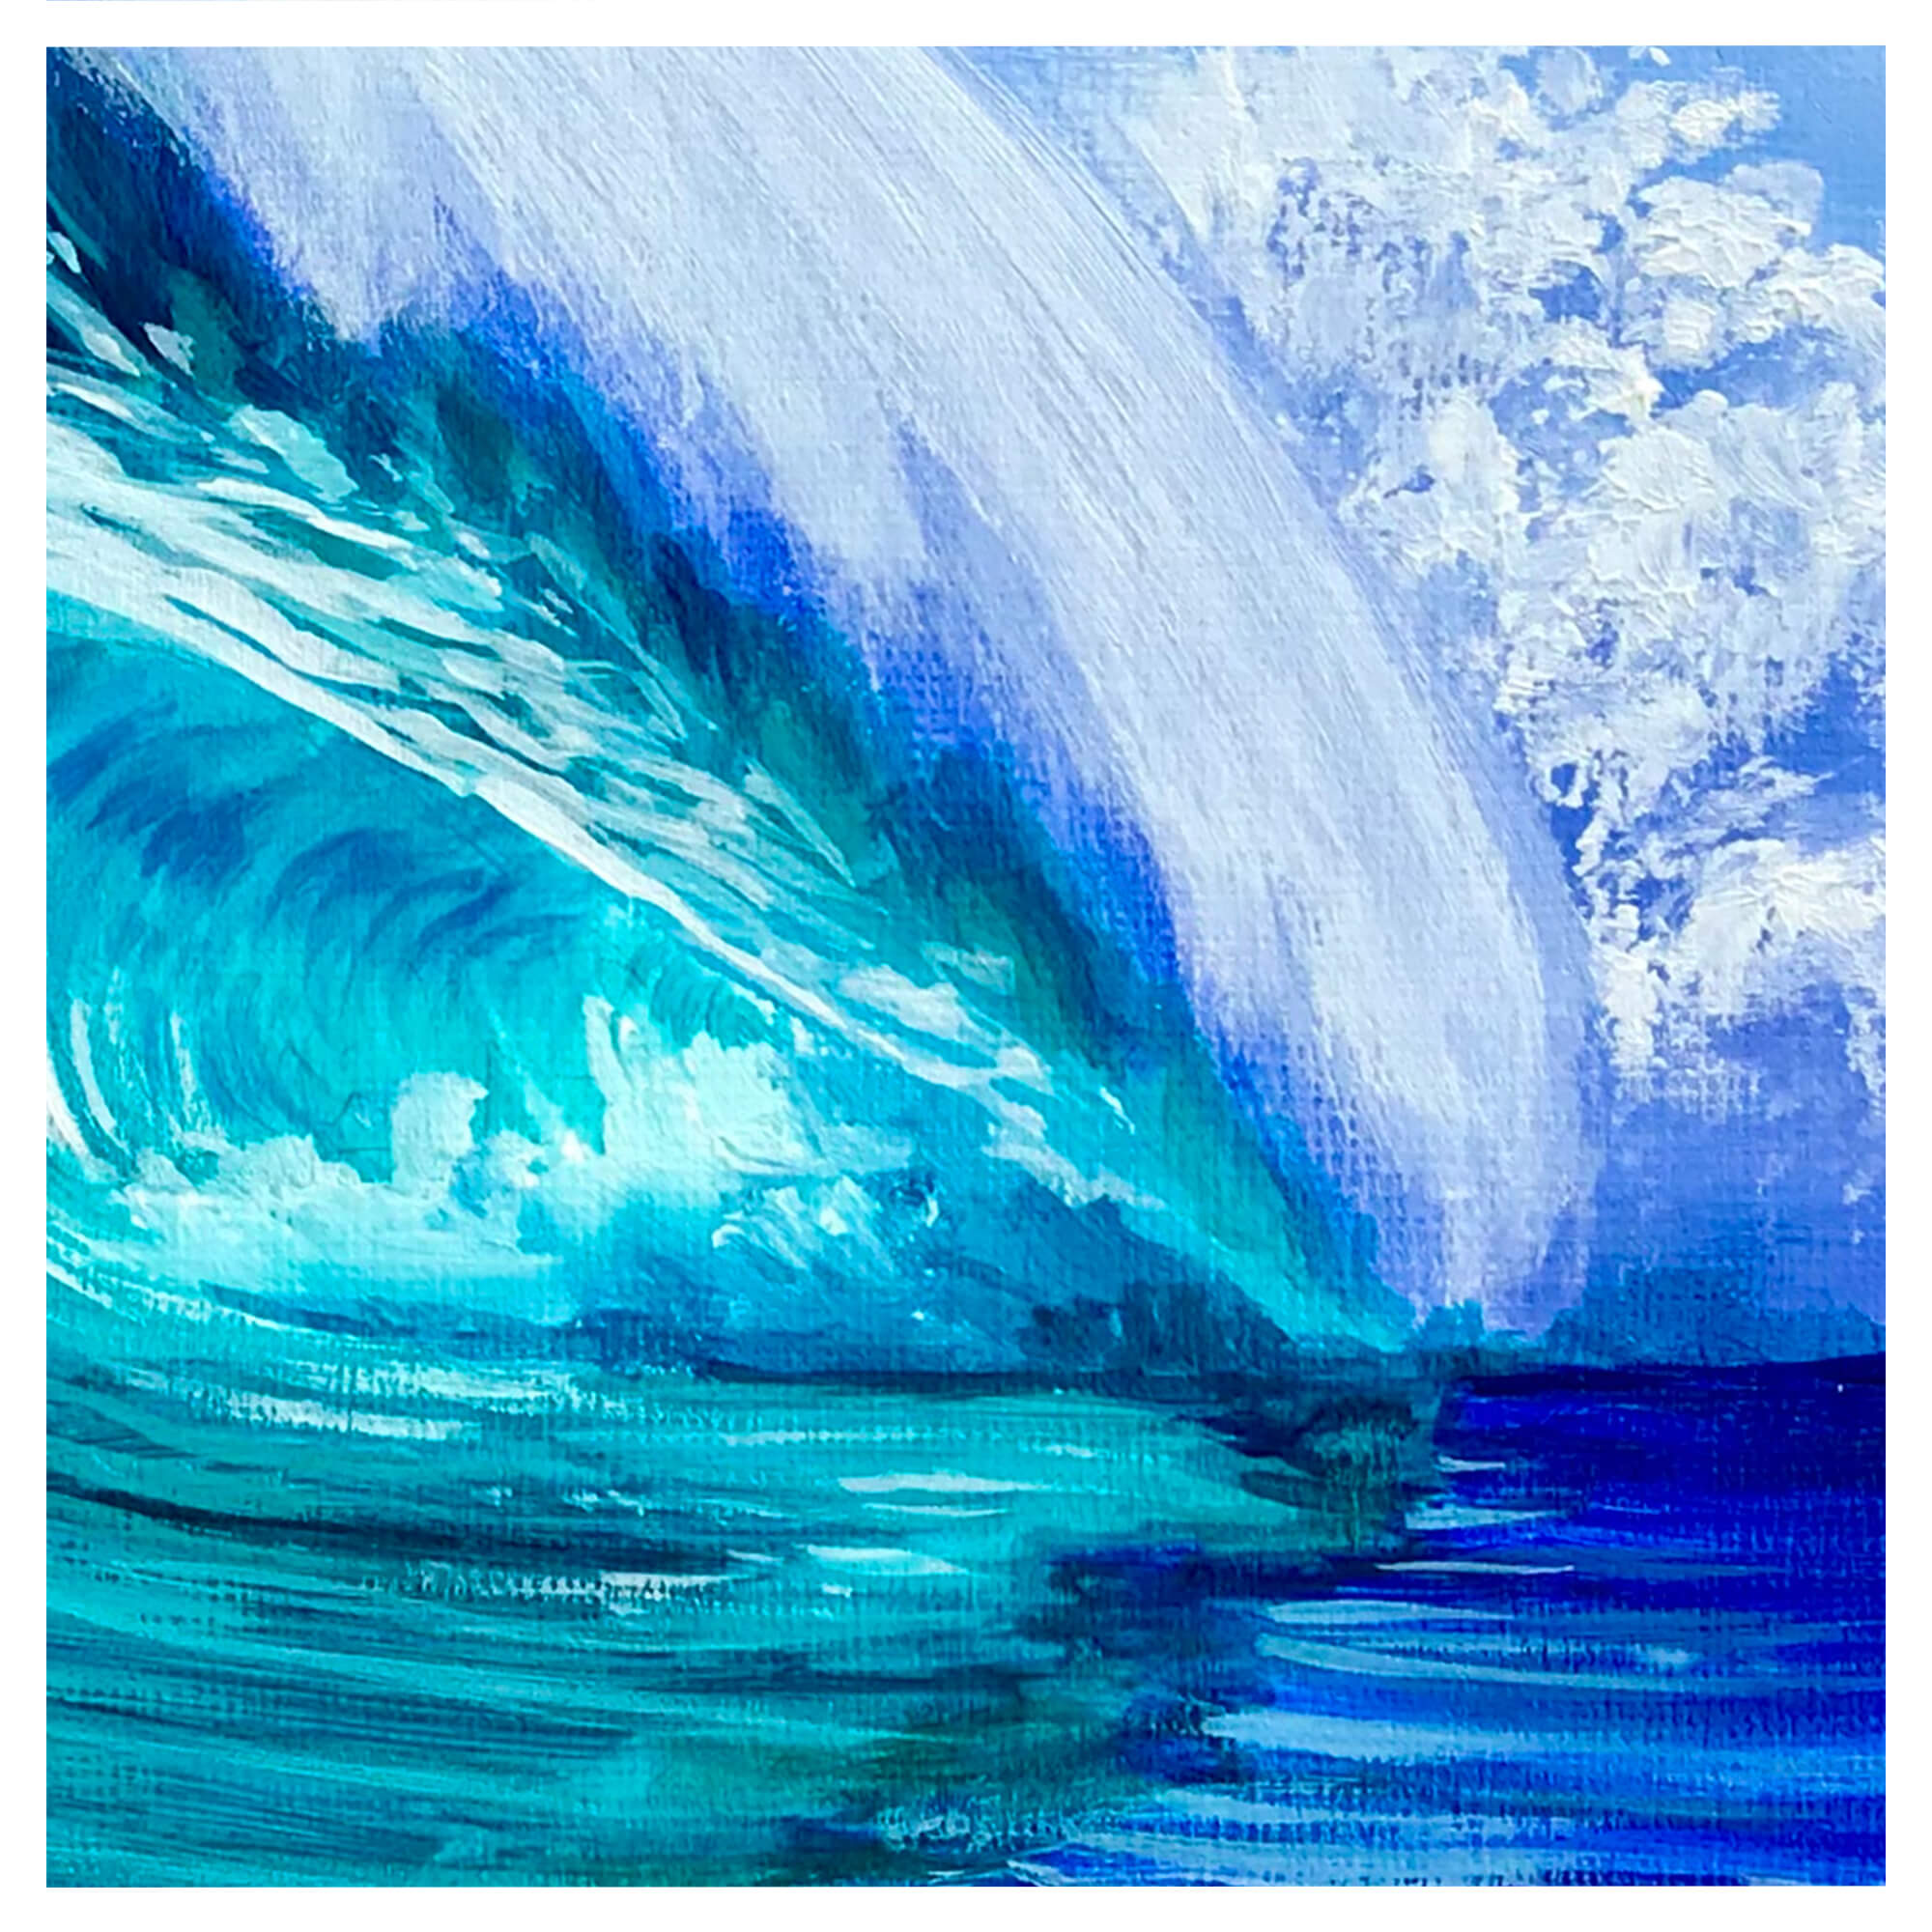 Teal and blue wave art by Hawaii artist Patrick Parker